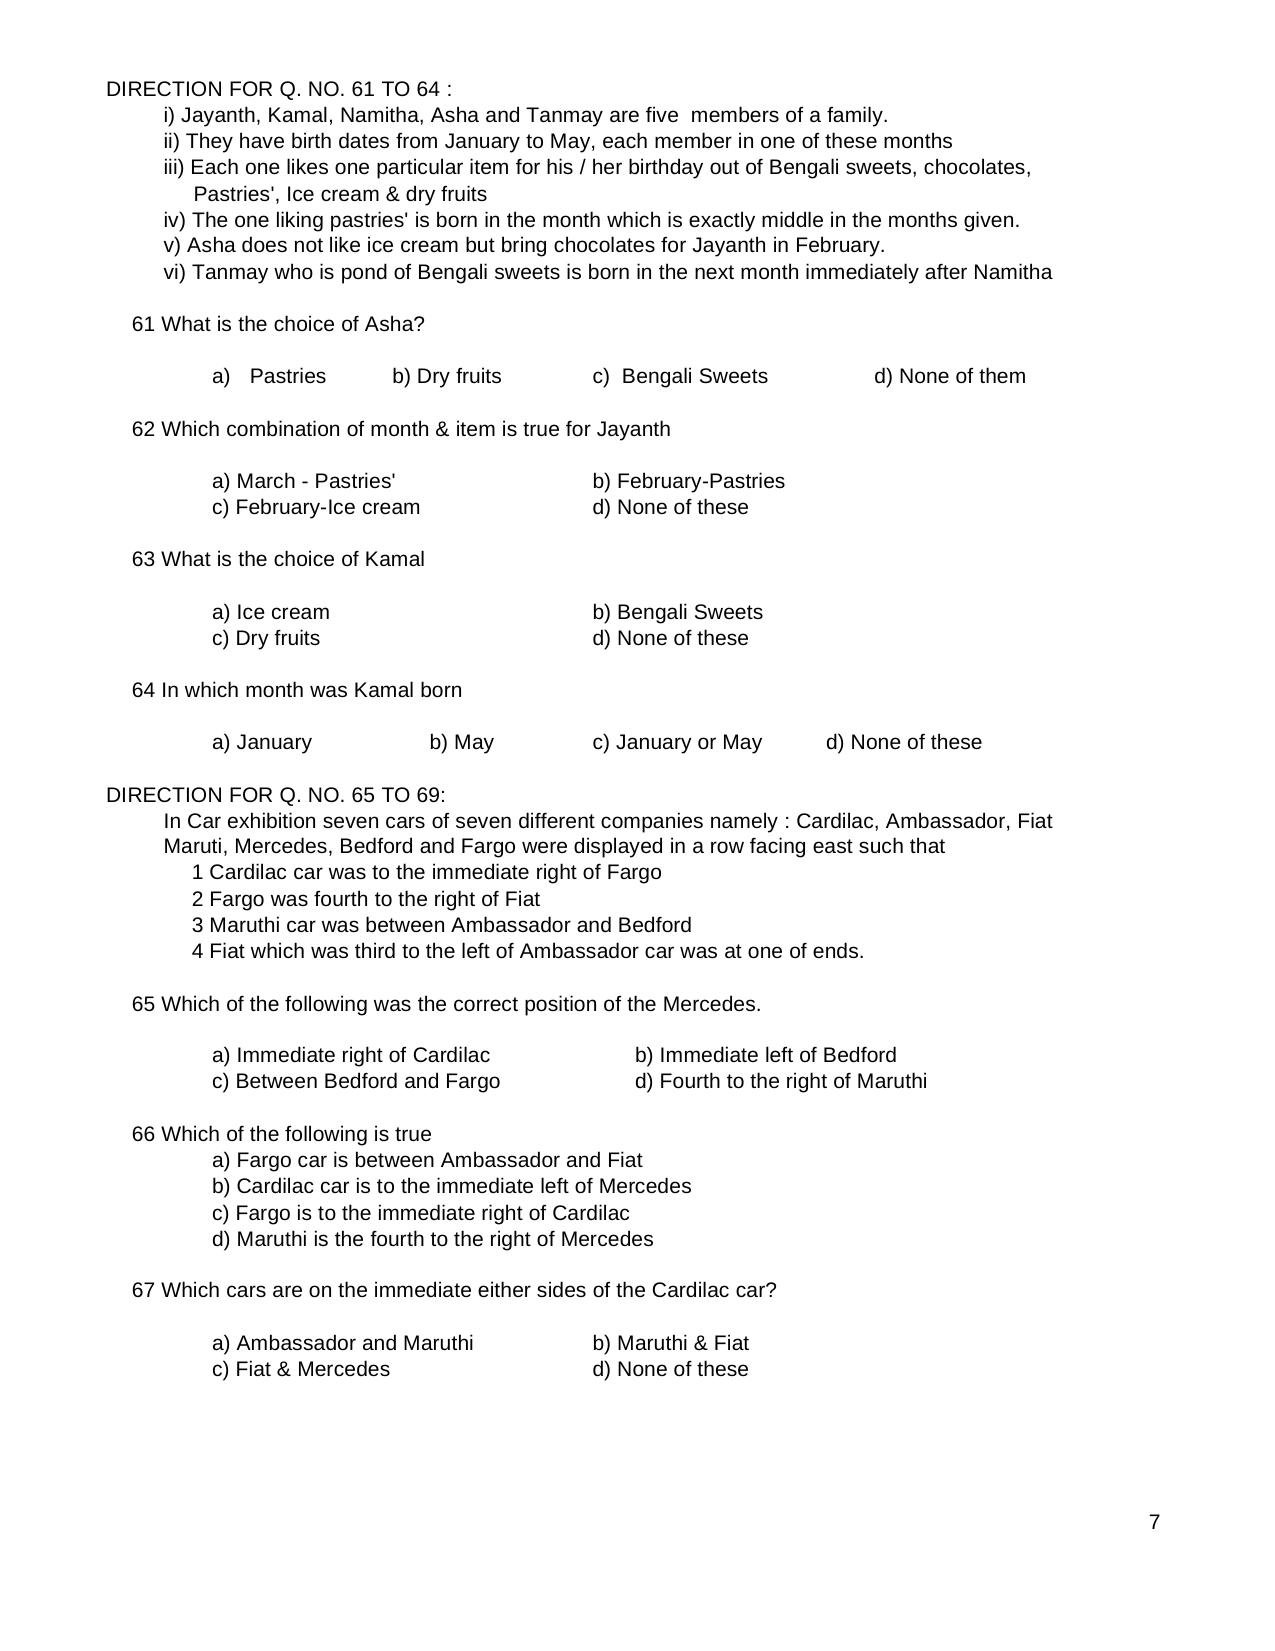 TNPSC Assistant System Engineer Sample Papers Numerical Ability - Page 7